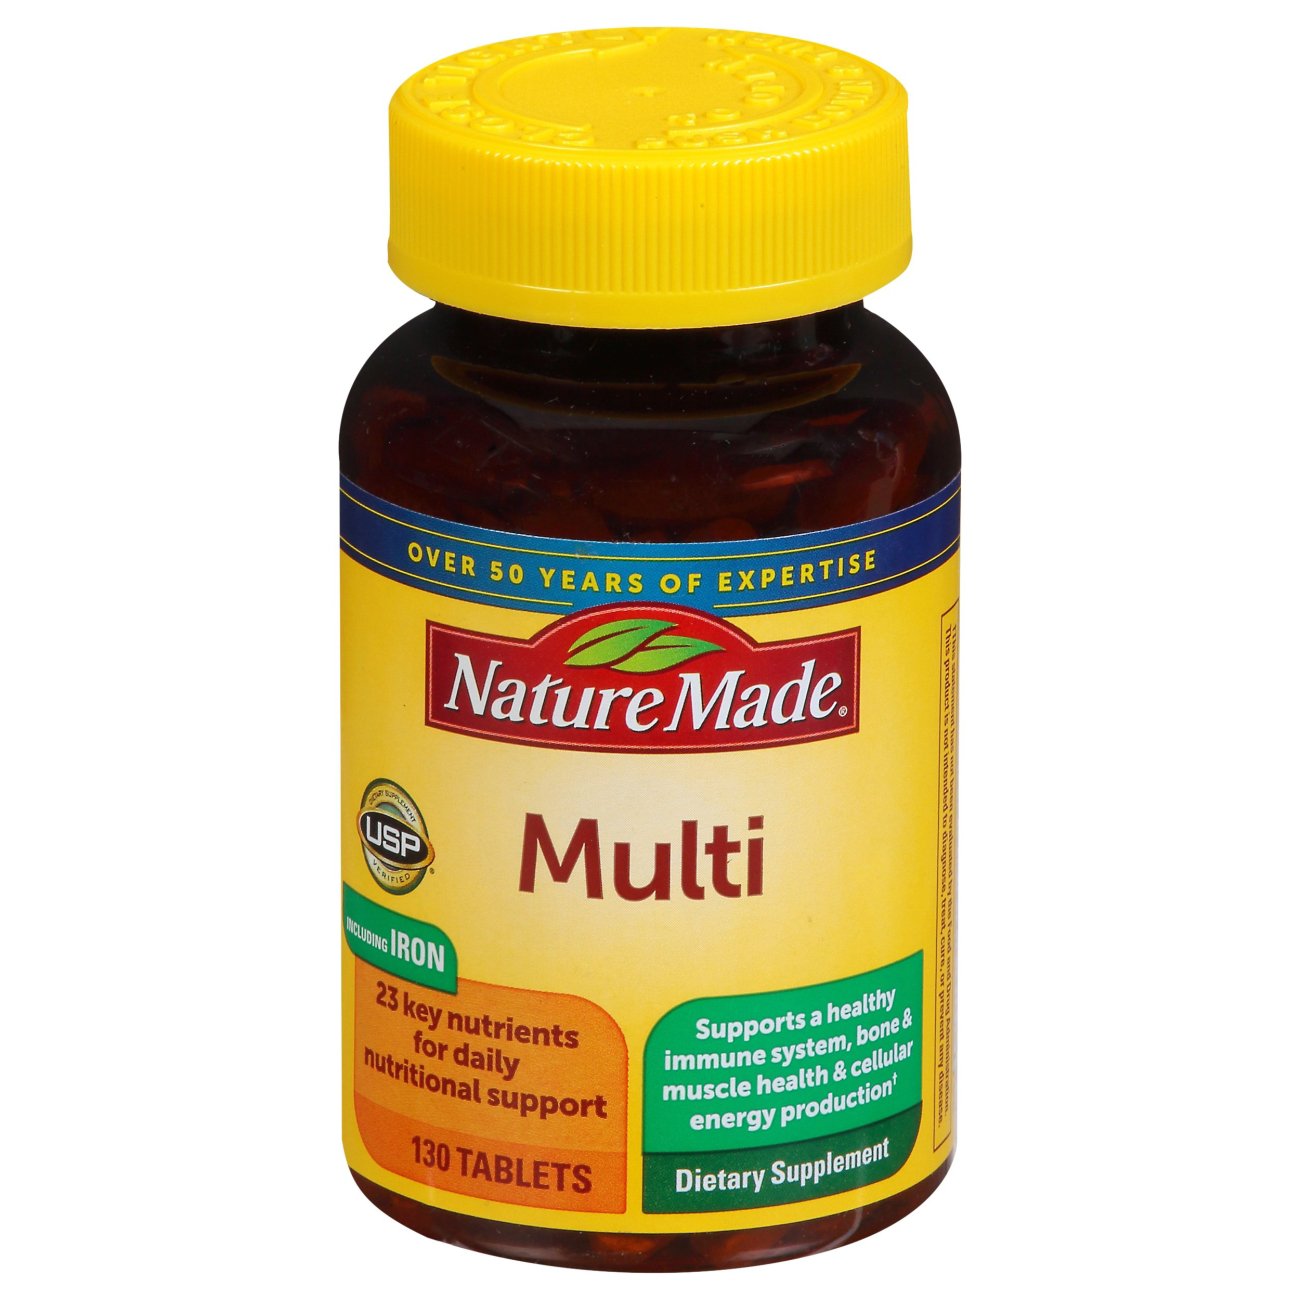 Nature Made Multi Complete with Iron Tablets - Shop Multivitamins at H-E-B